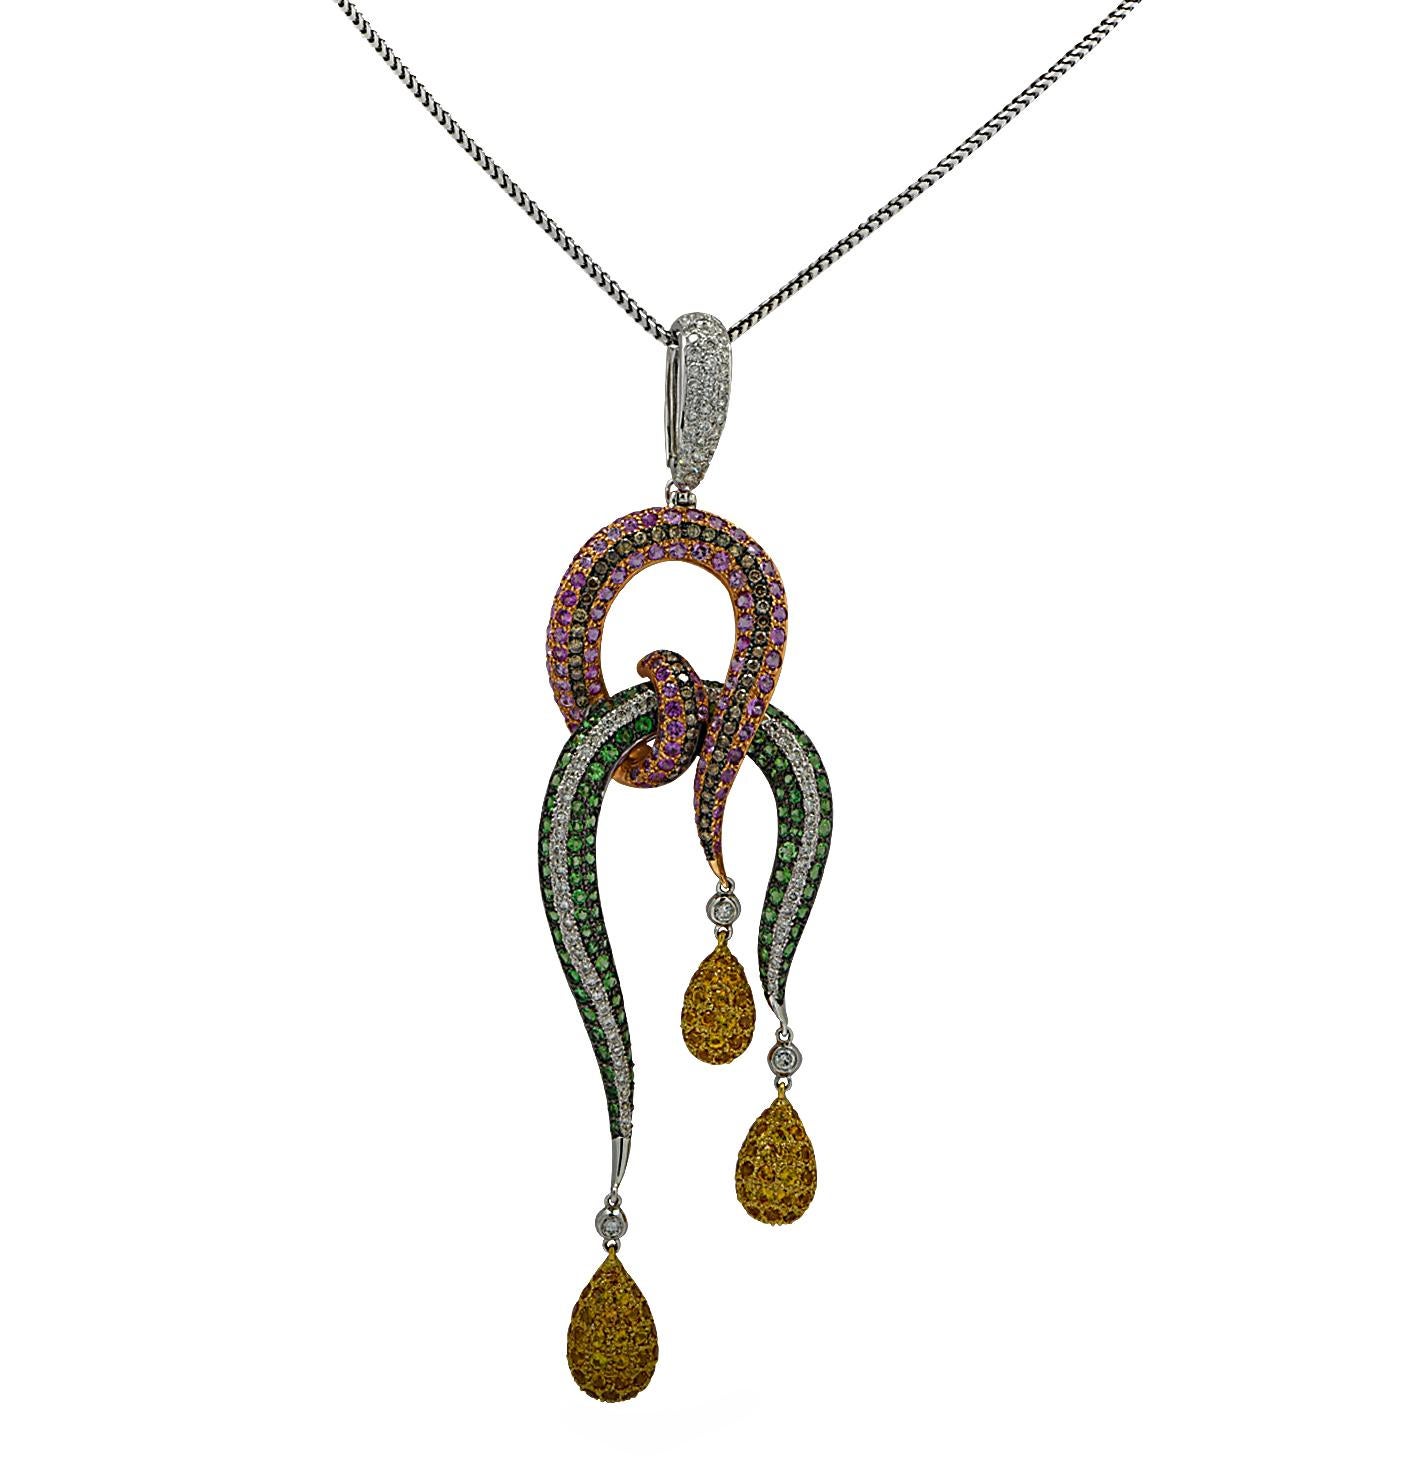 Modern Diamond, Sapphire and Emerald Necklace and Pendant